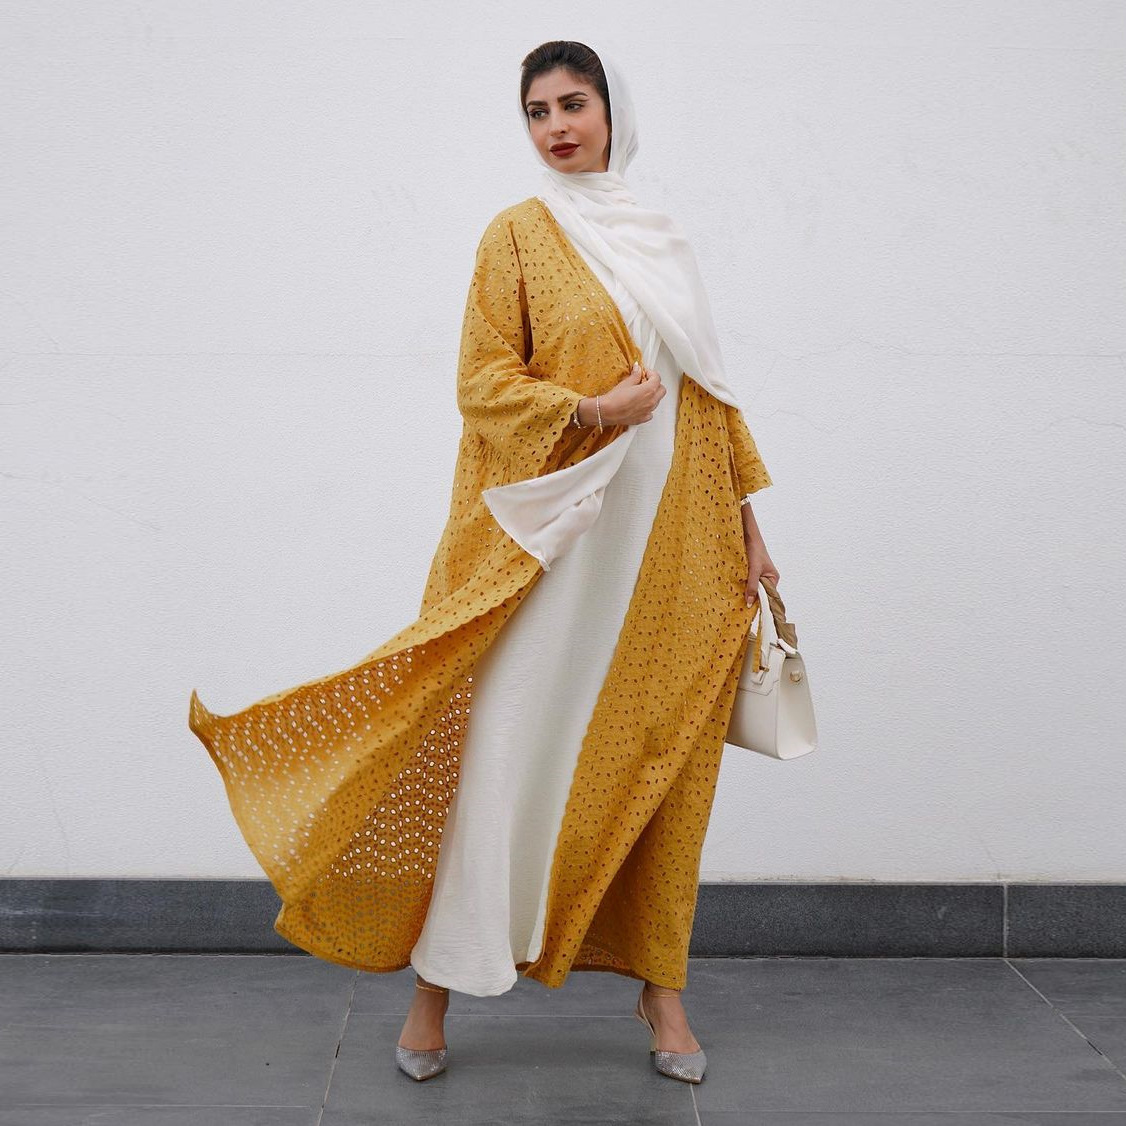 Jalabiya Step into sophistication with a pure cotton jalabiya set | featuring a breezy crochet outer jacket and a white inner layer | a fashionable cardigan style | and a touch of minimalist refinement